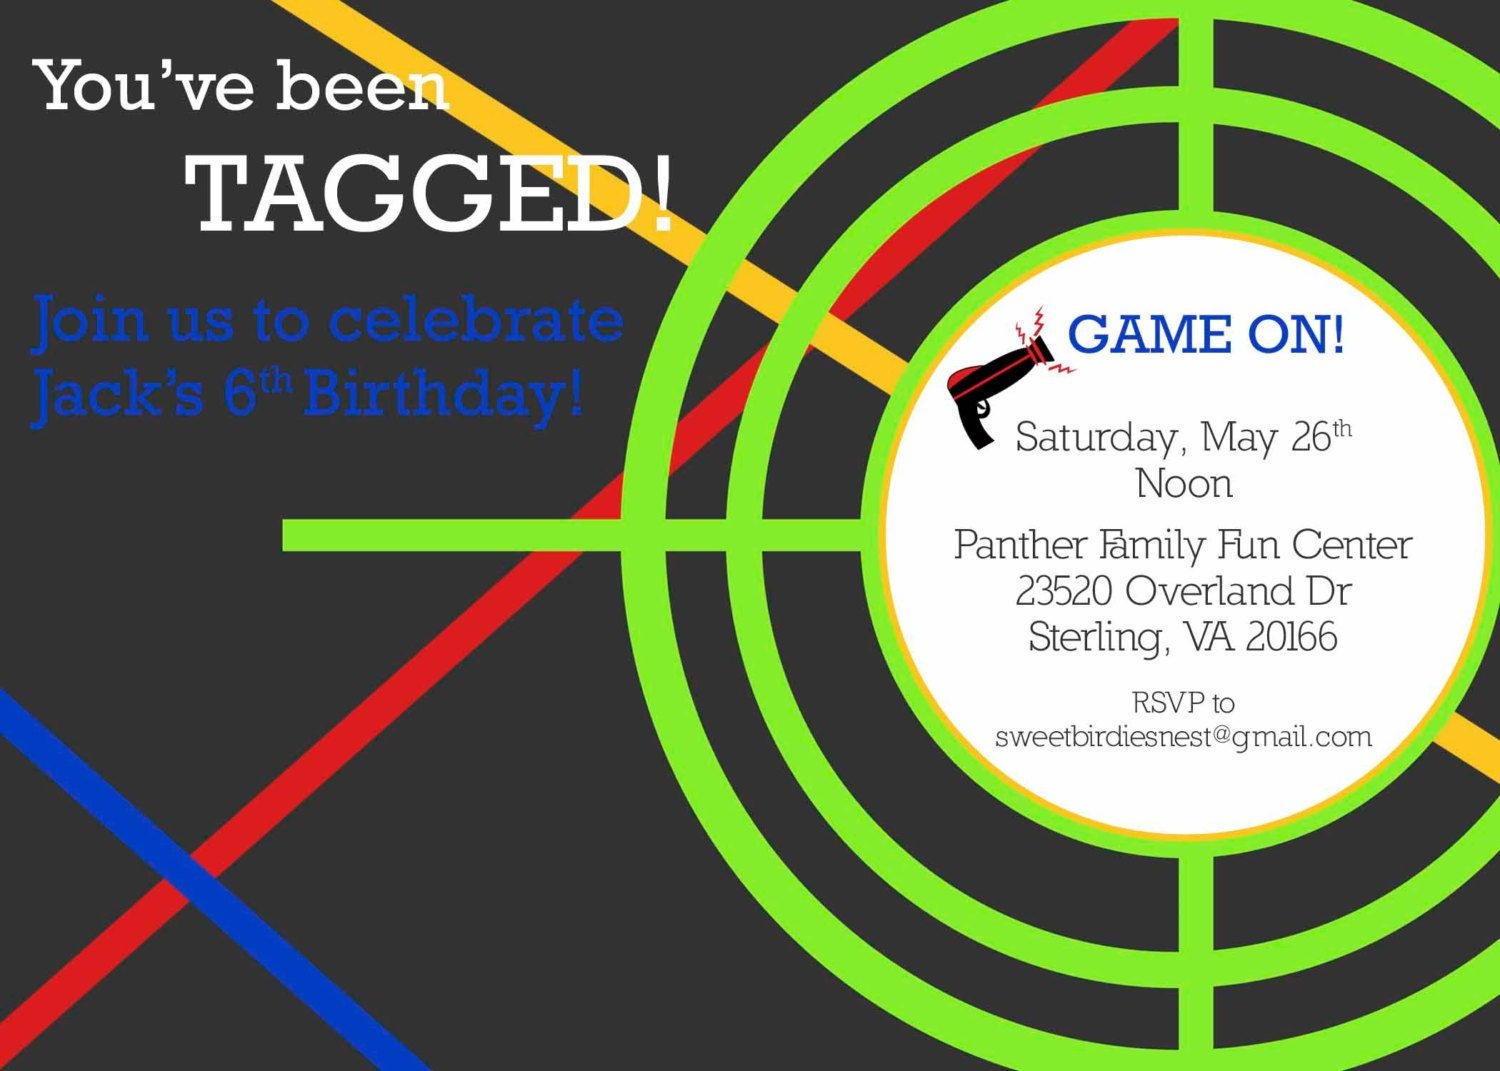 Laser Tag Party Invitations Template Free